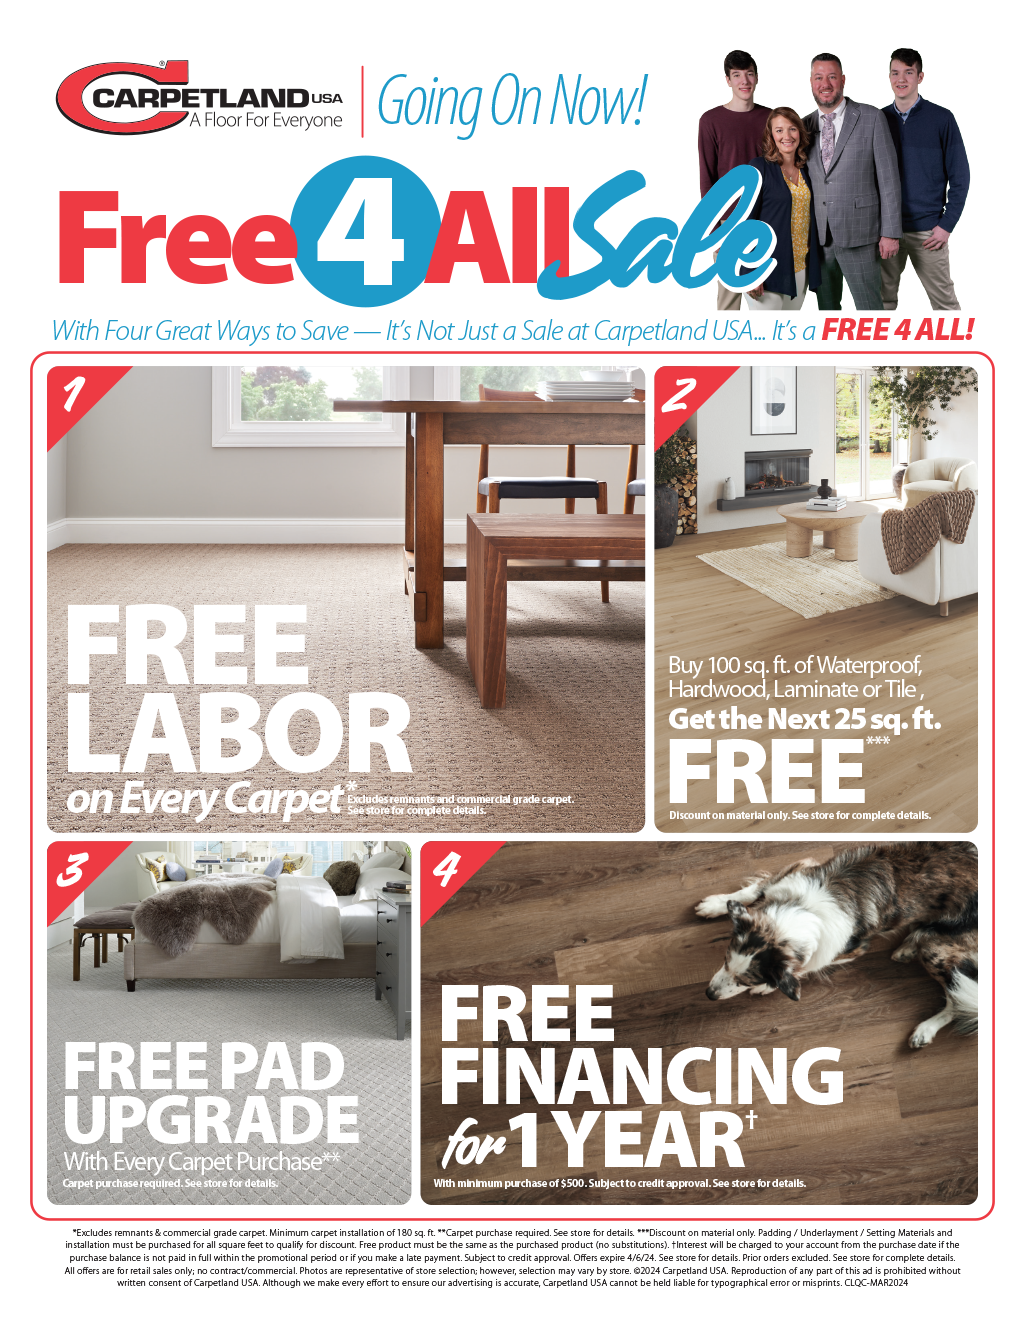 Free 4 All Sale!